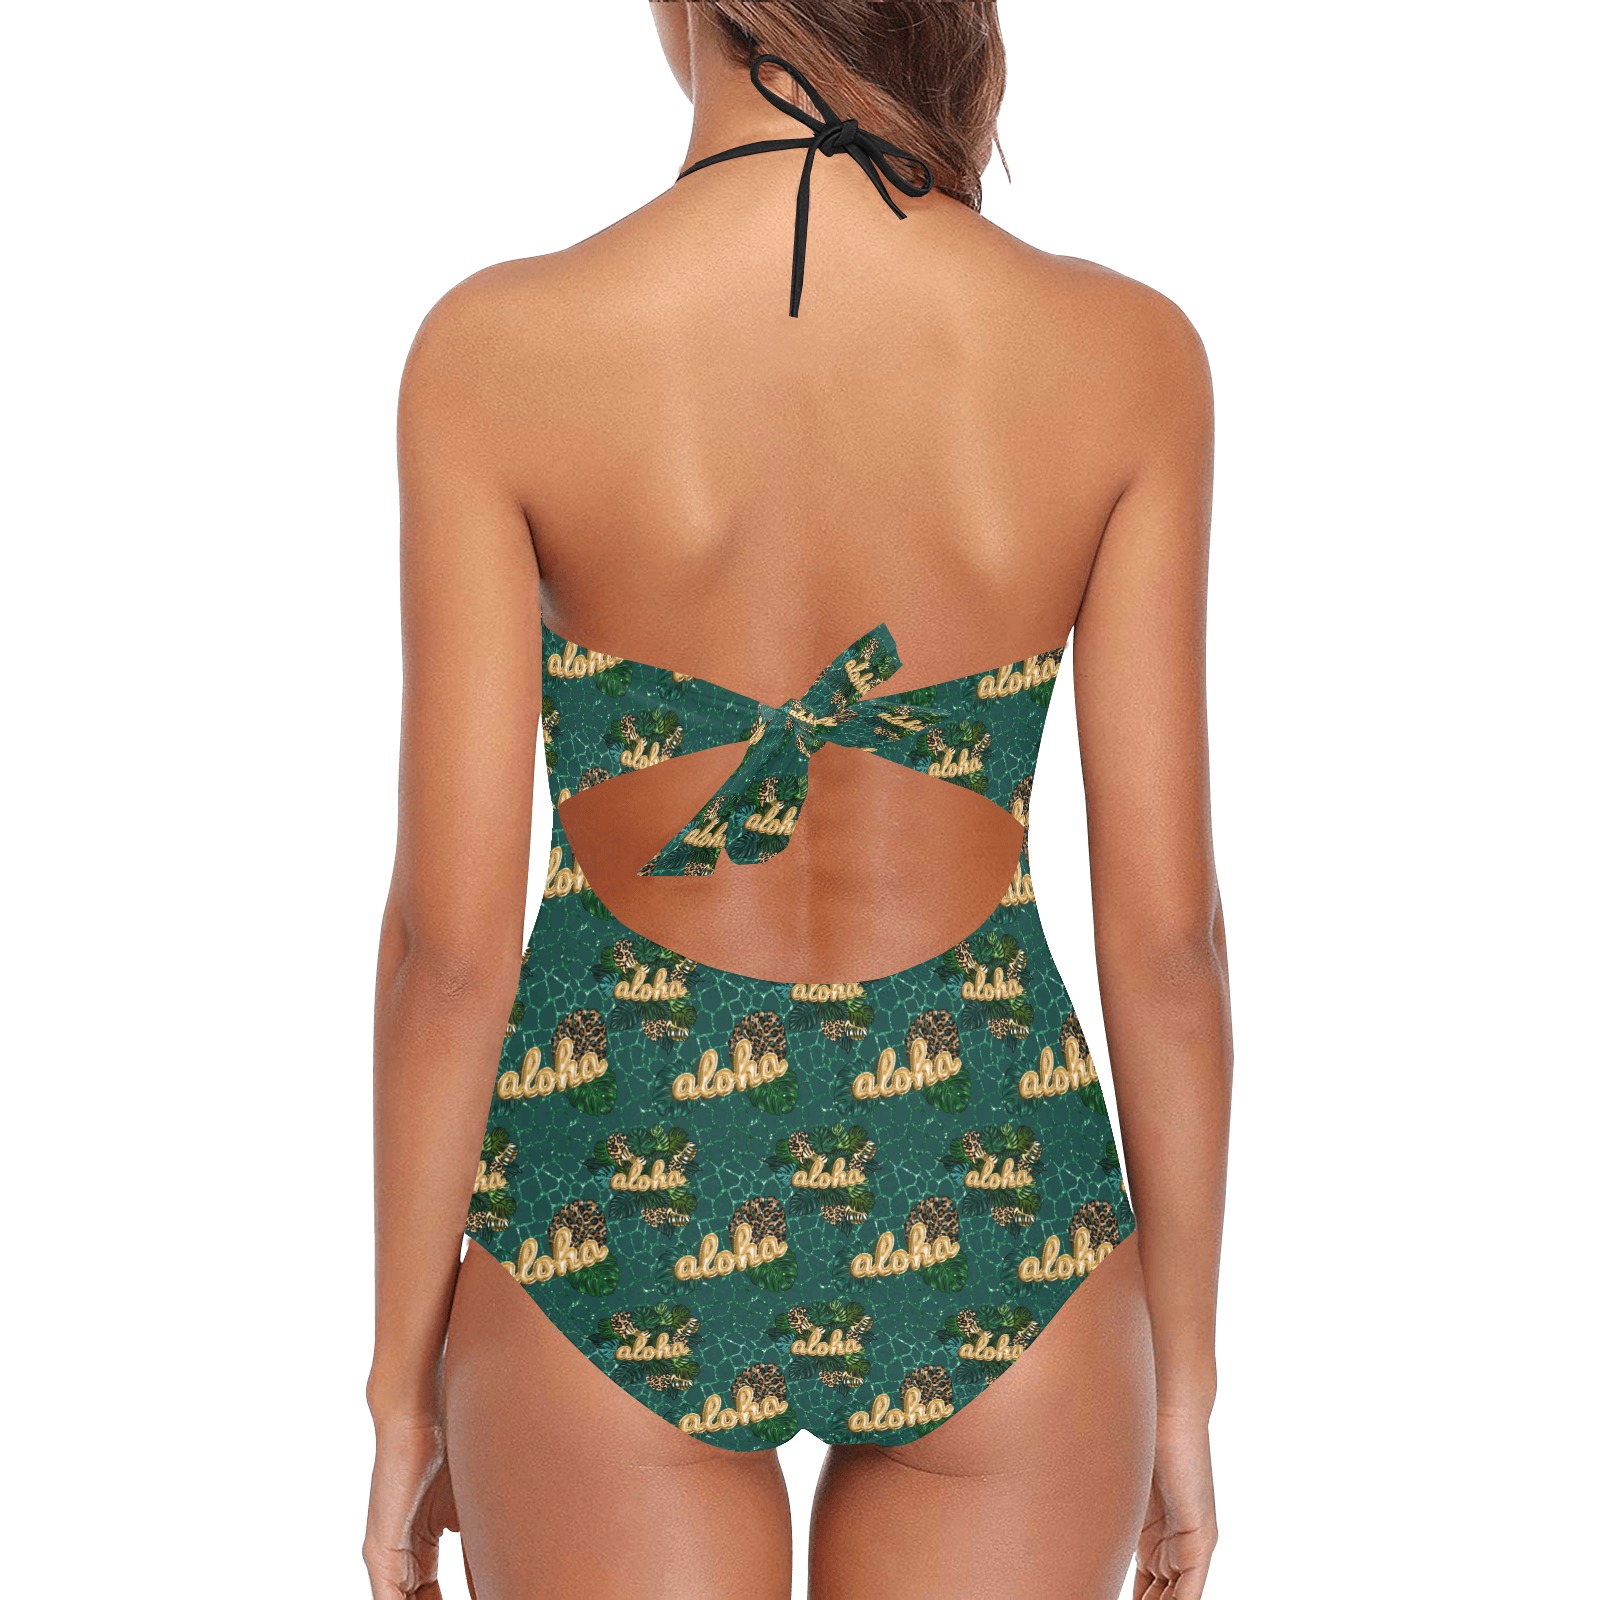 Aloha Leopard Print Halter Style with Lace Detail One Piece Swim Suit Lace Band Embossing Swimsuit (Model S15)